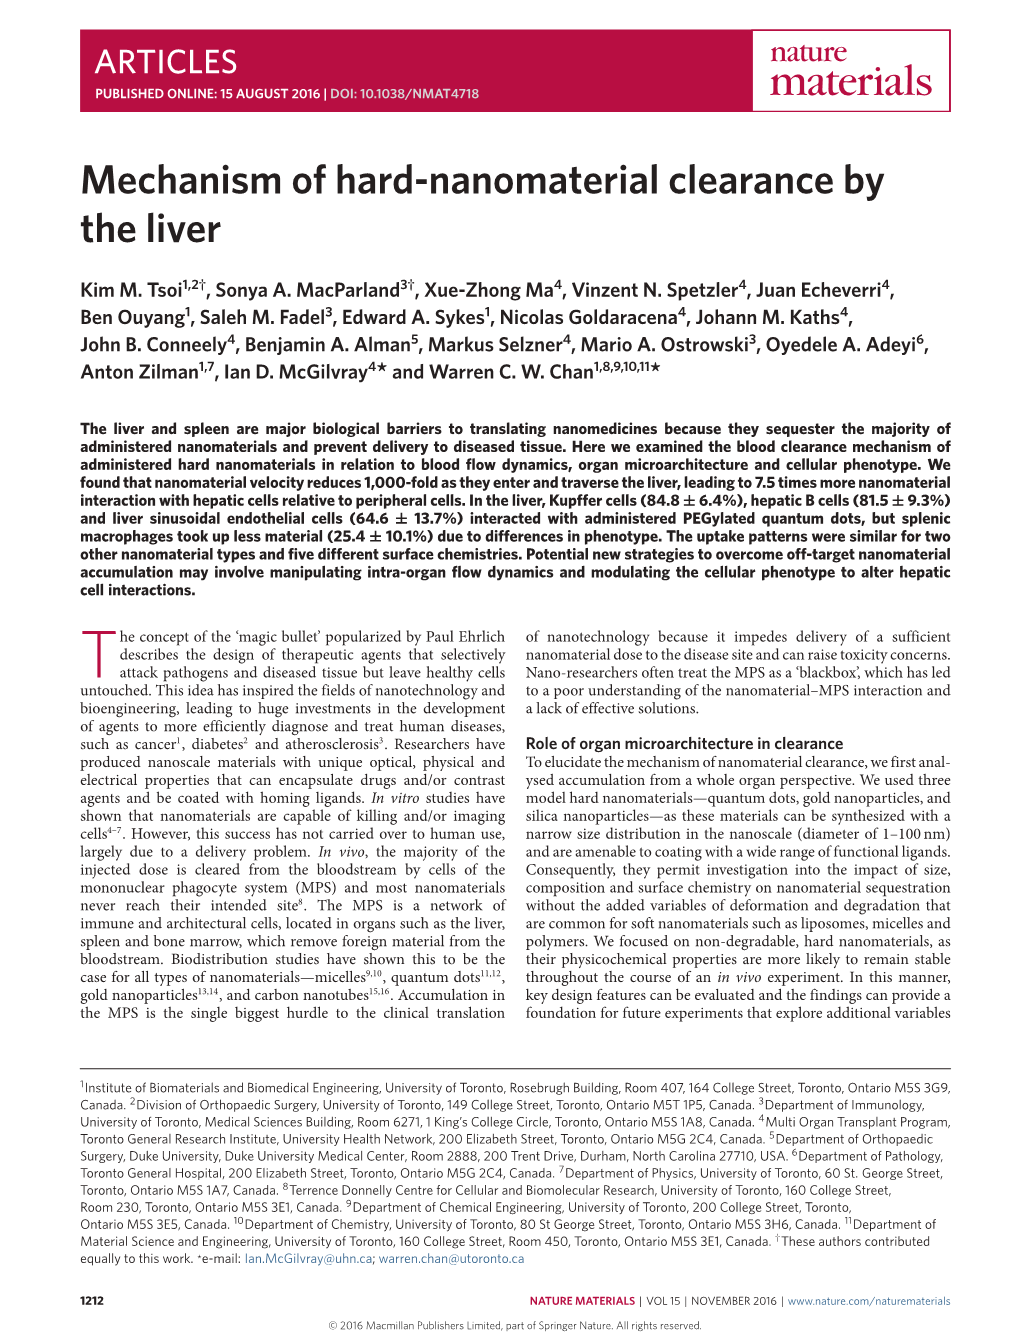 Mechanism of Hard-Nanomaterial Clearance by the Liver